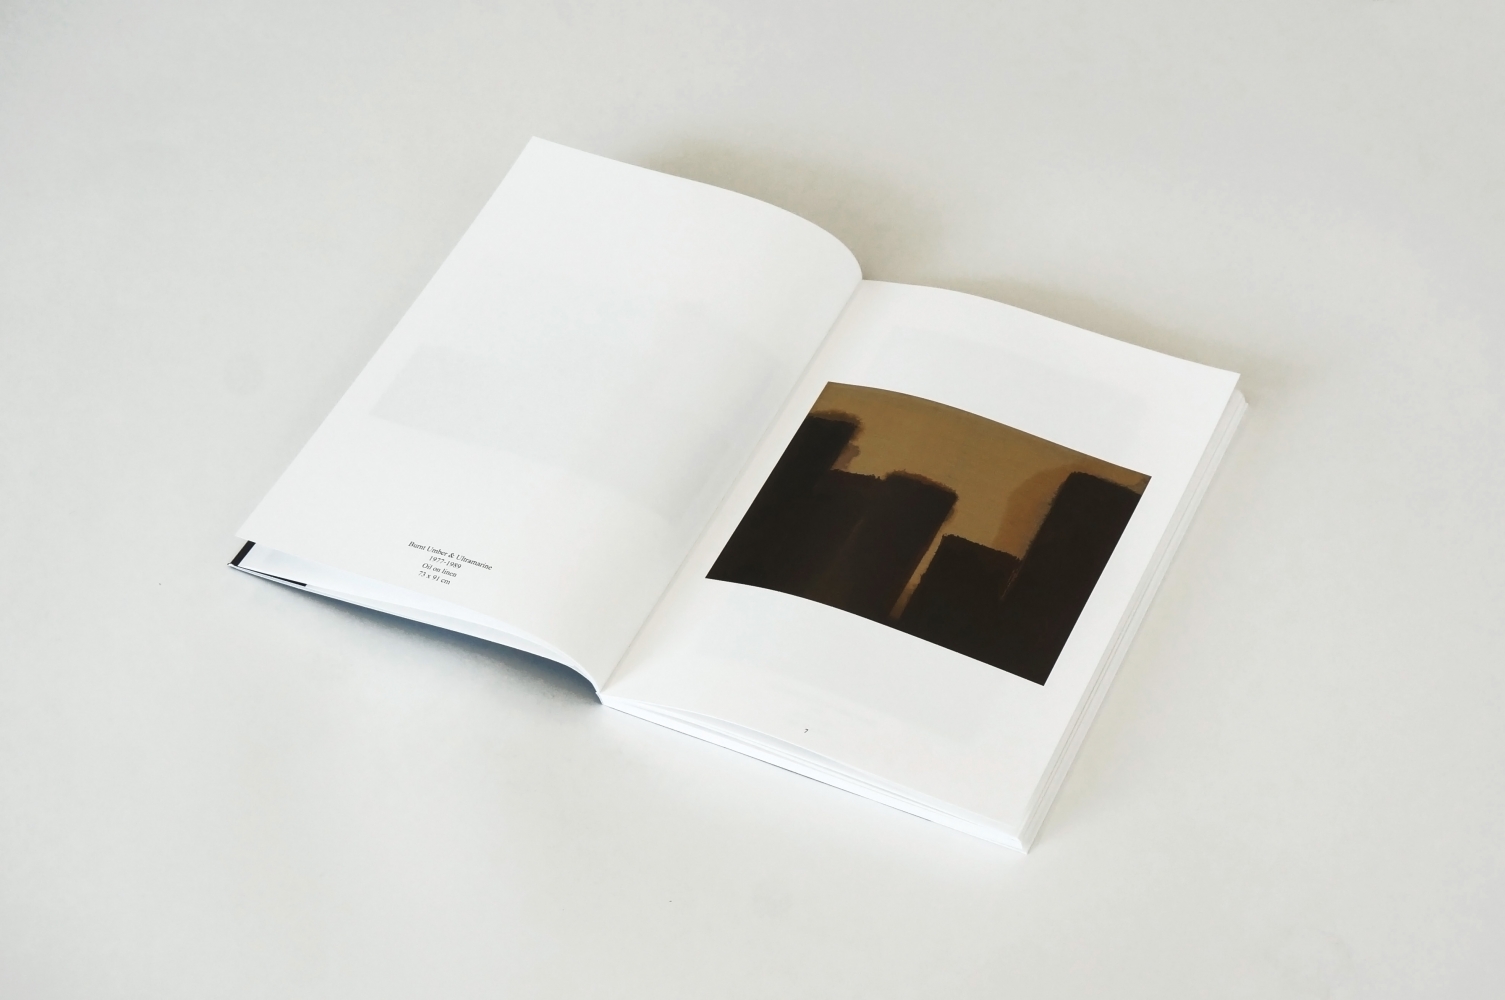 Yun Hyong-keun 1989-1999

Published by PKM Gallery, 2020, 74 pages

&amp;nbsp;